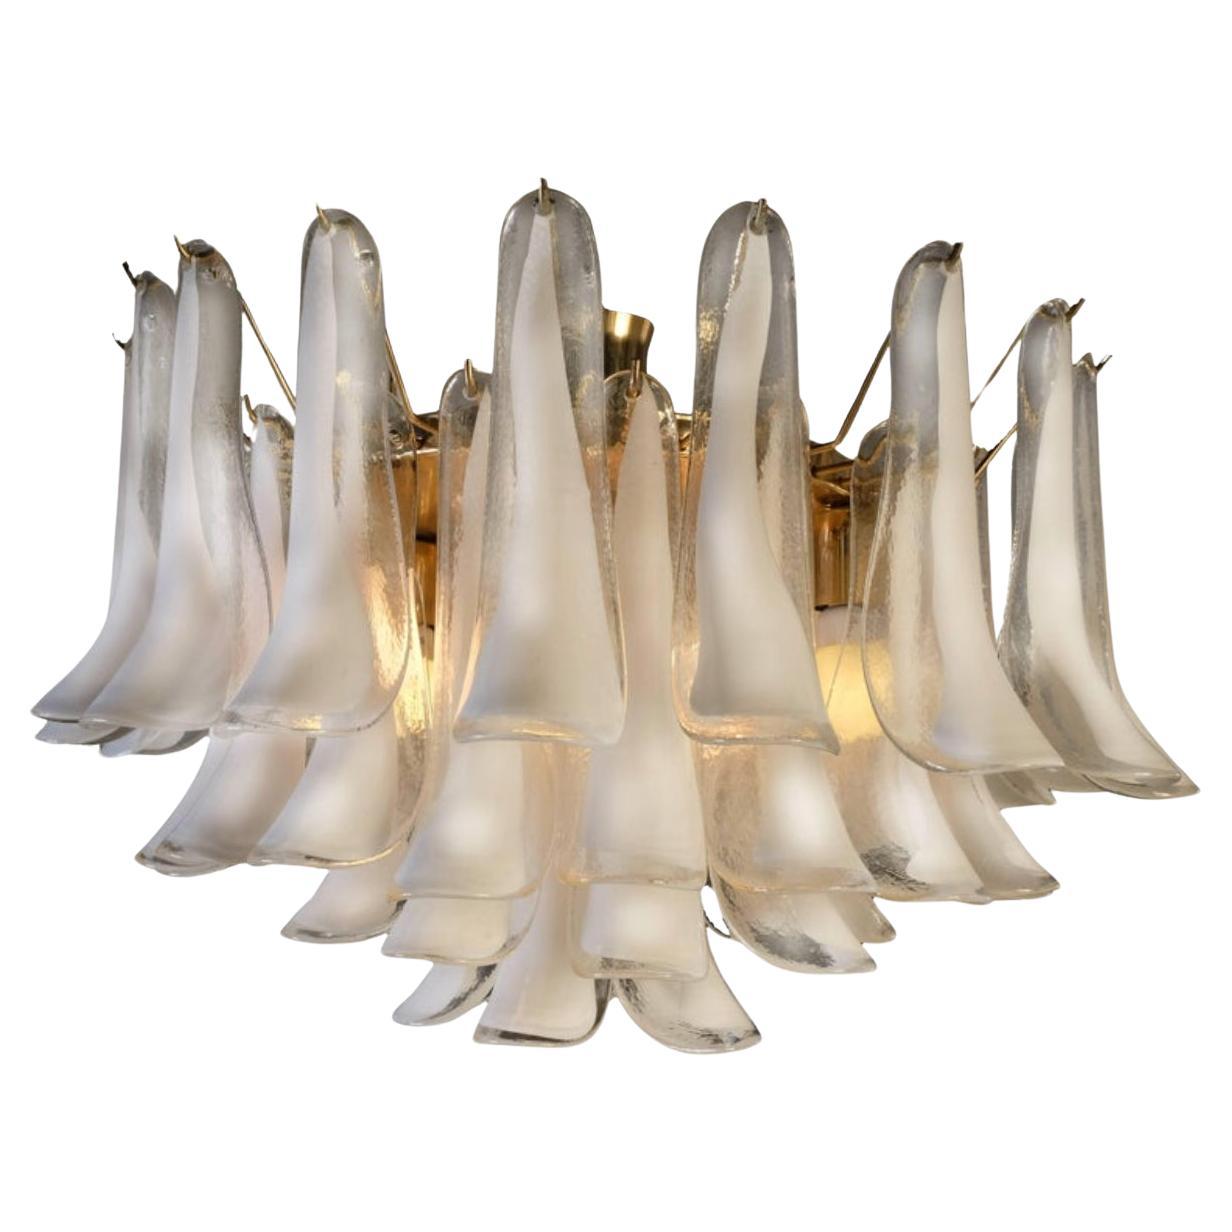 Murano Italian glass chandelier. Fantastic chandelier with trasparent and white “lattimo” glasses, nickel-plated metal frame. It has 53 big monumental petals glass. The glasses are very high quality, the photos do not do the beauty, luster of these